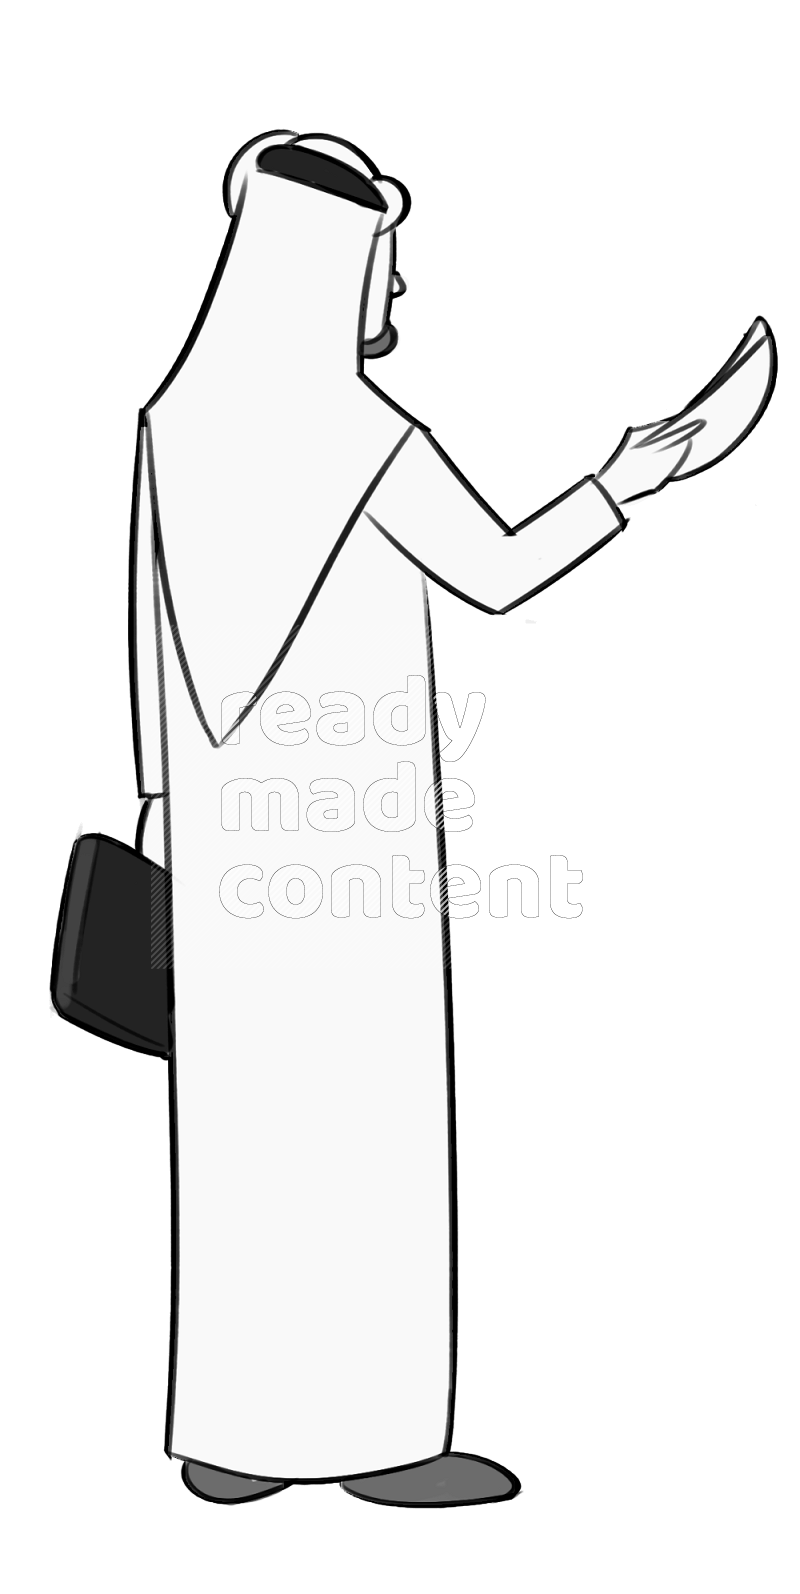 Saudi man holding a file holding a briefcase standing different angles eye level